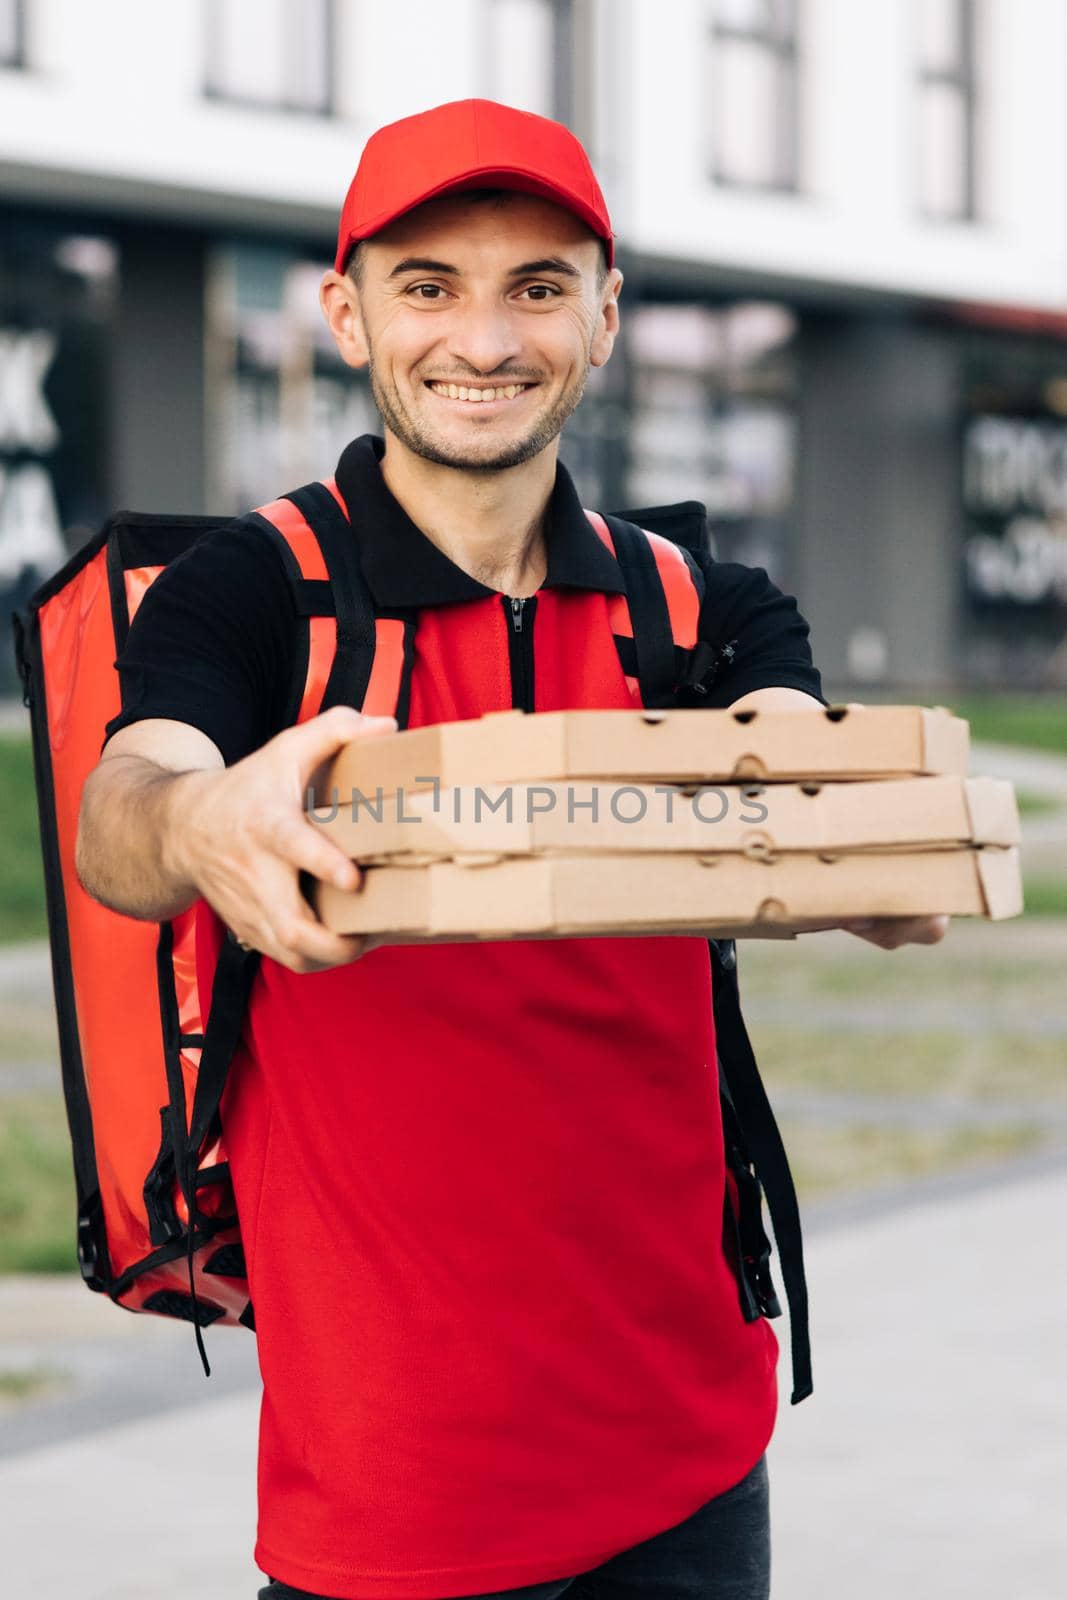 Attractive young delivery man courier in red cap smiling into camera holding pizza boxes delivering fast food around city. Outdoor portrait. Urban worker. Concept of courier, home delivery, pizza.